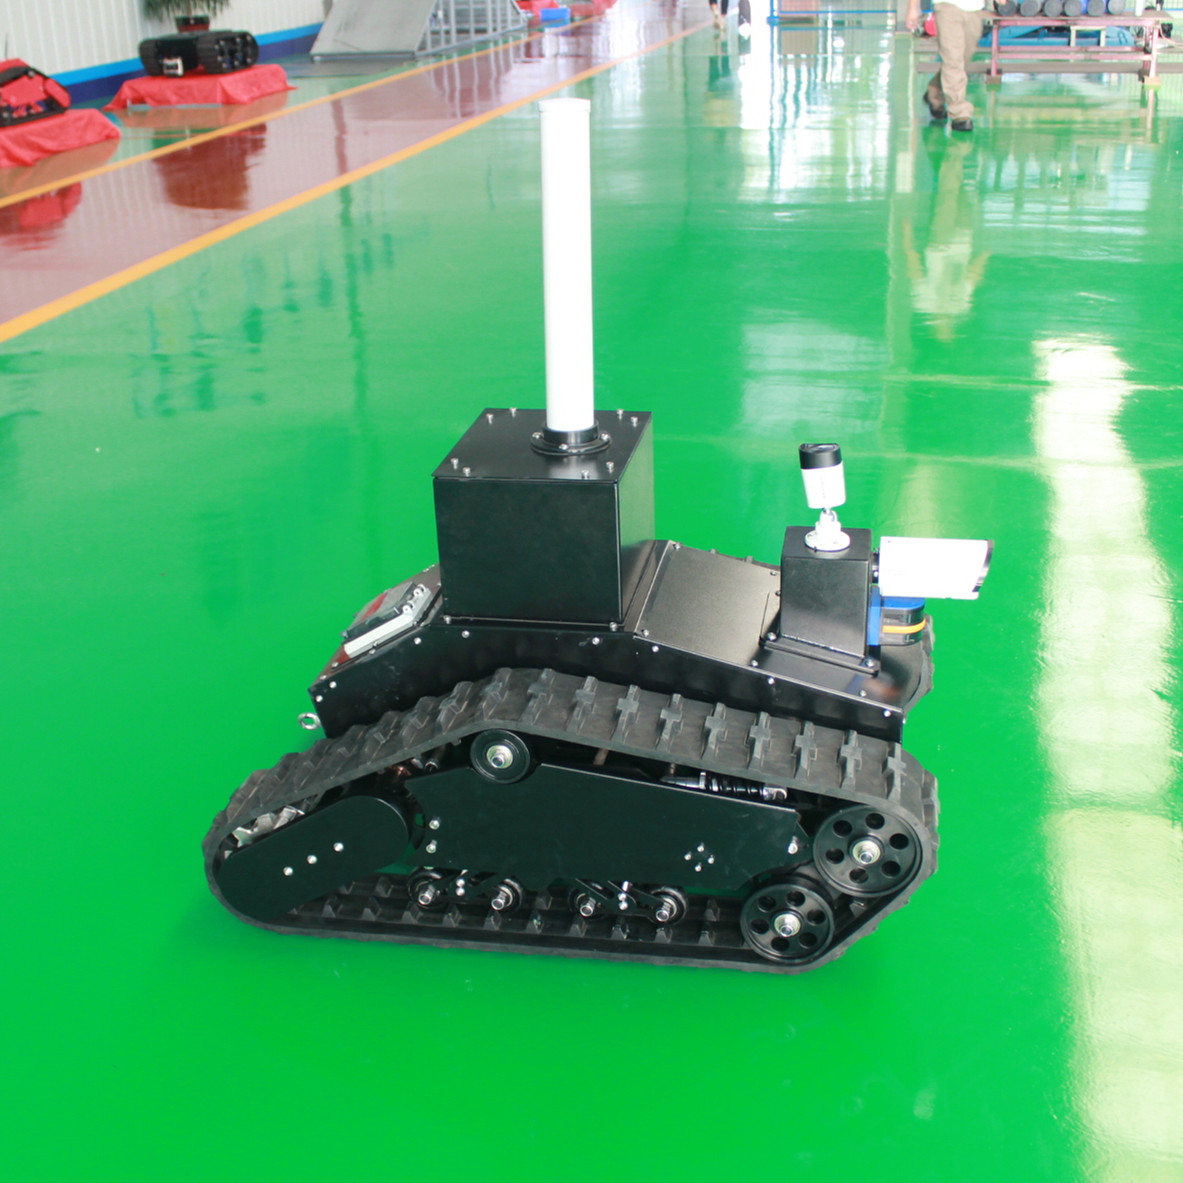 patrol inspection robot chassis